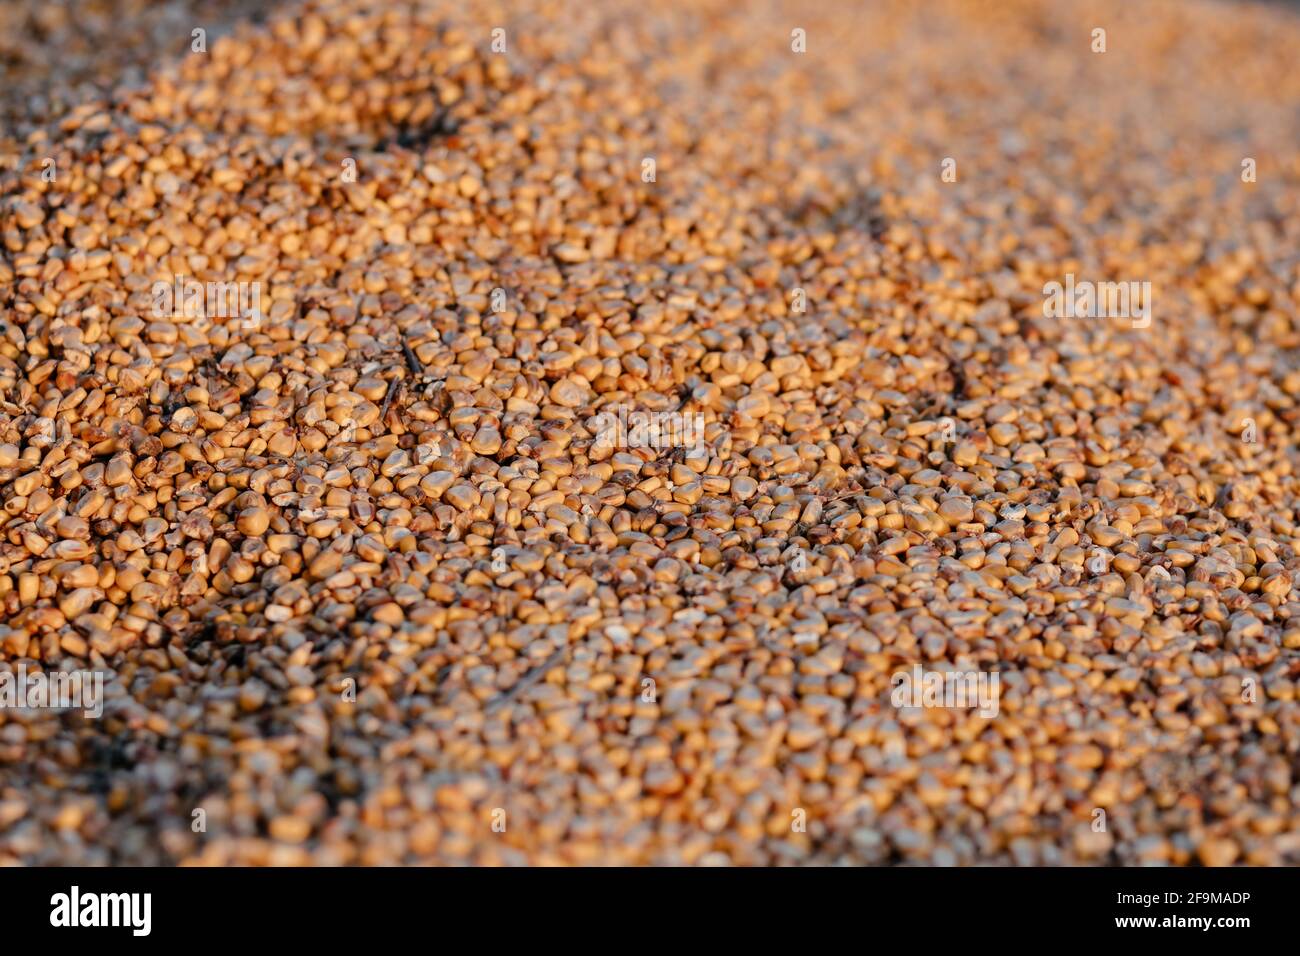 Corn grain after harvest. Close-up. Place for your text. Stock Photo